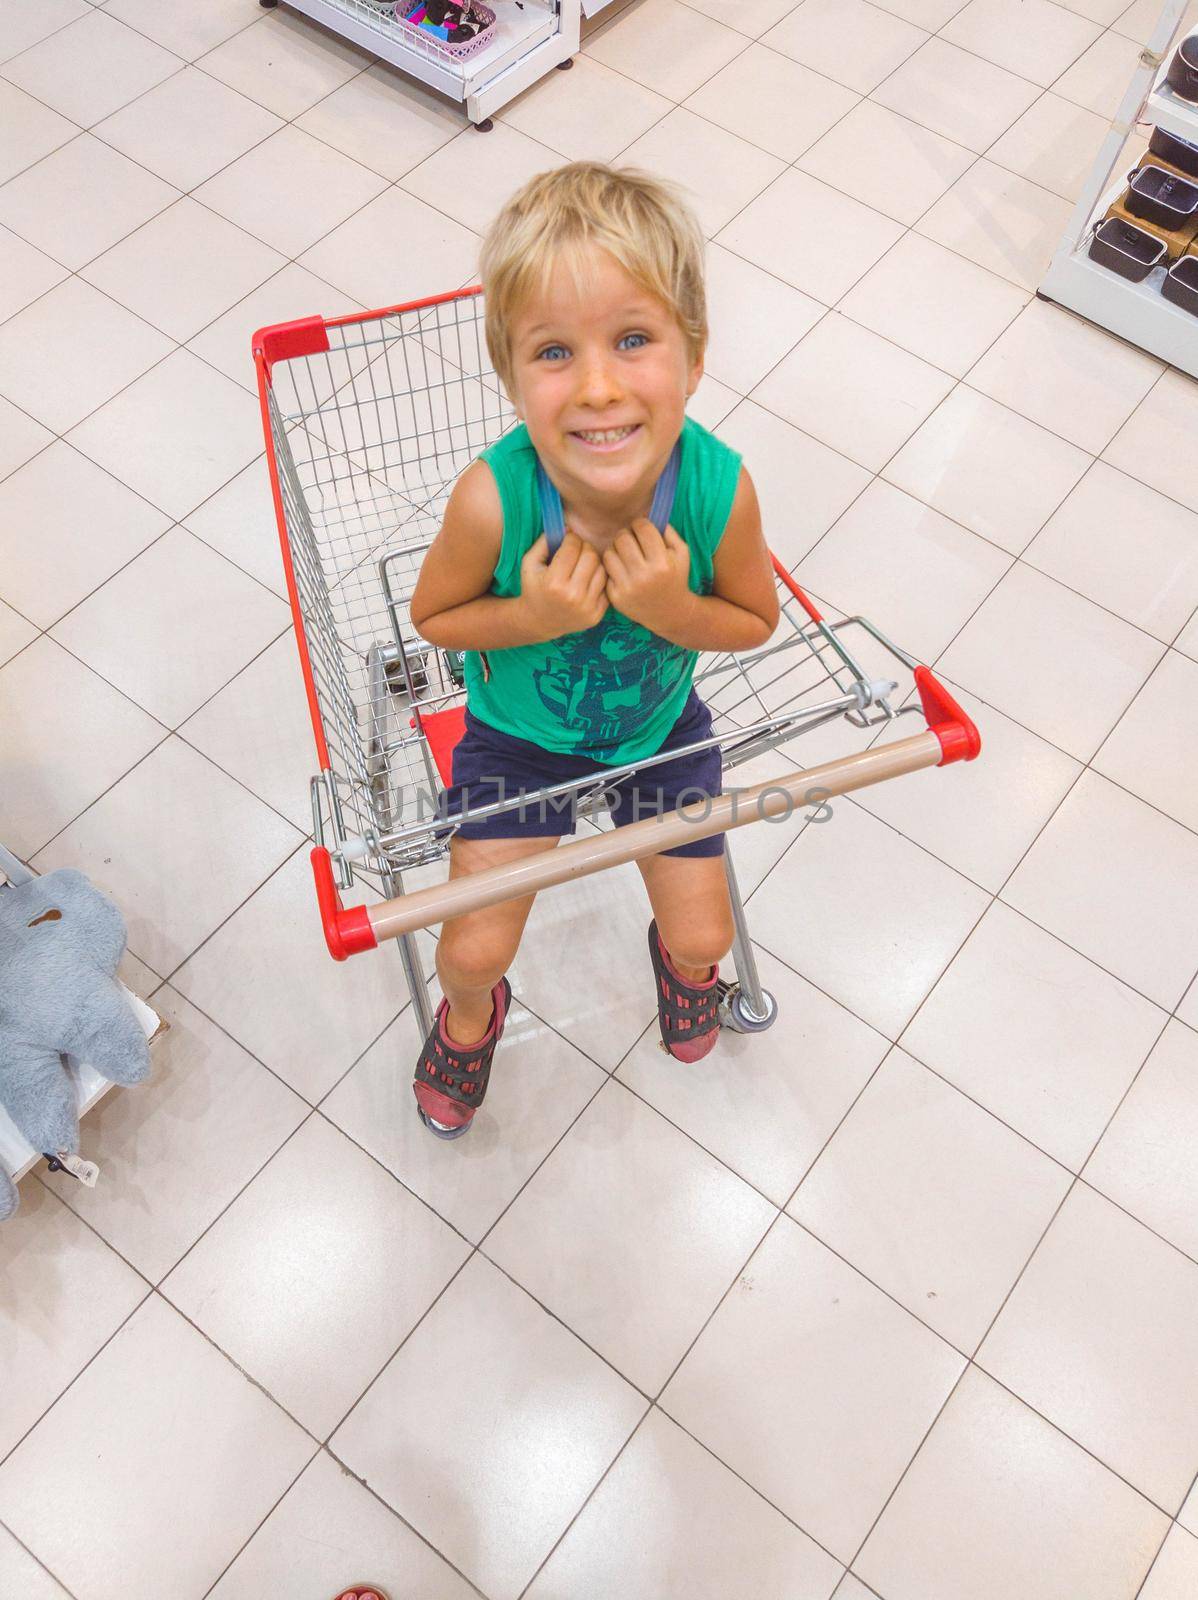 child sitting in a shopping basket in the supermarket asking to buy a new toy shopping with a child concept by nandrey85